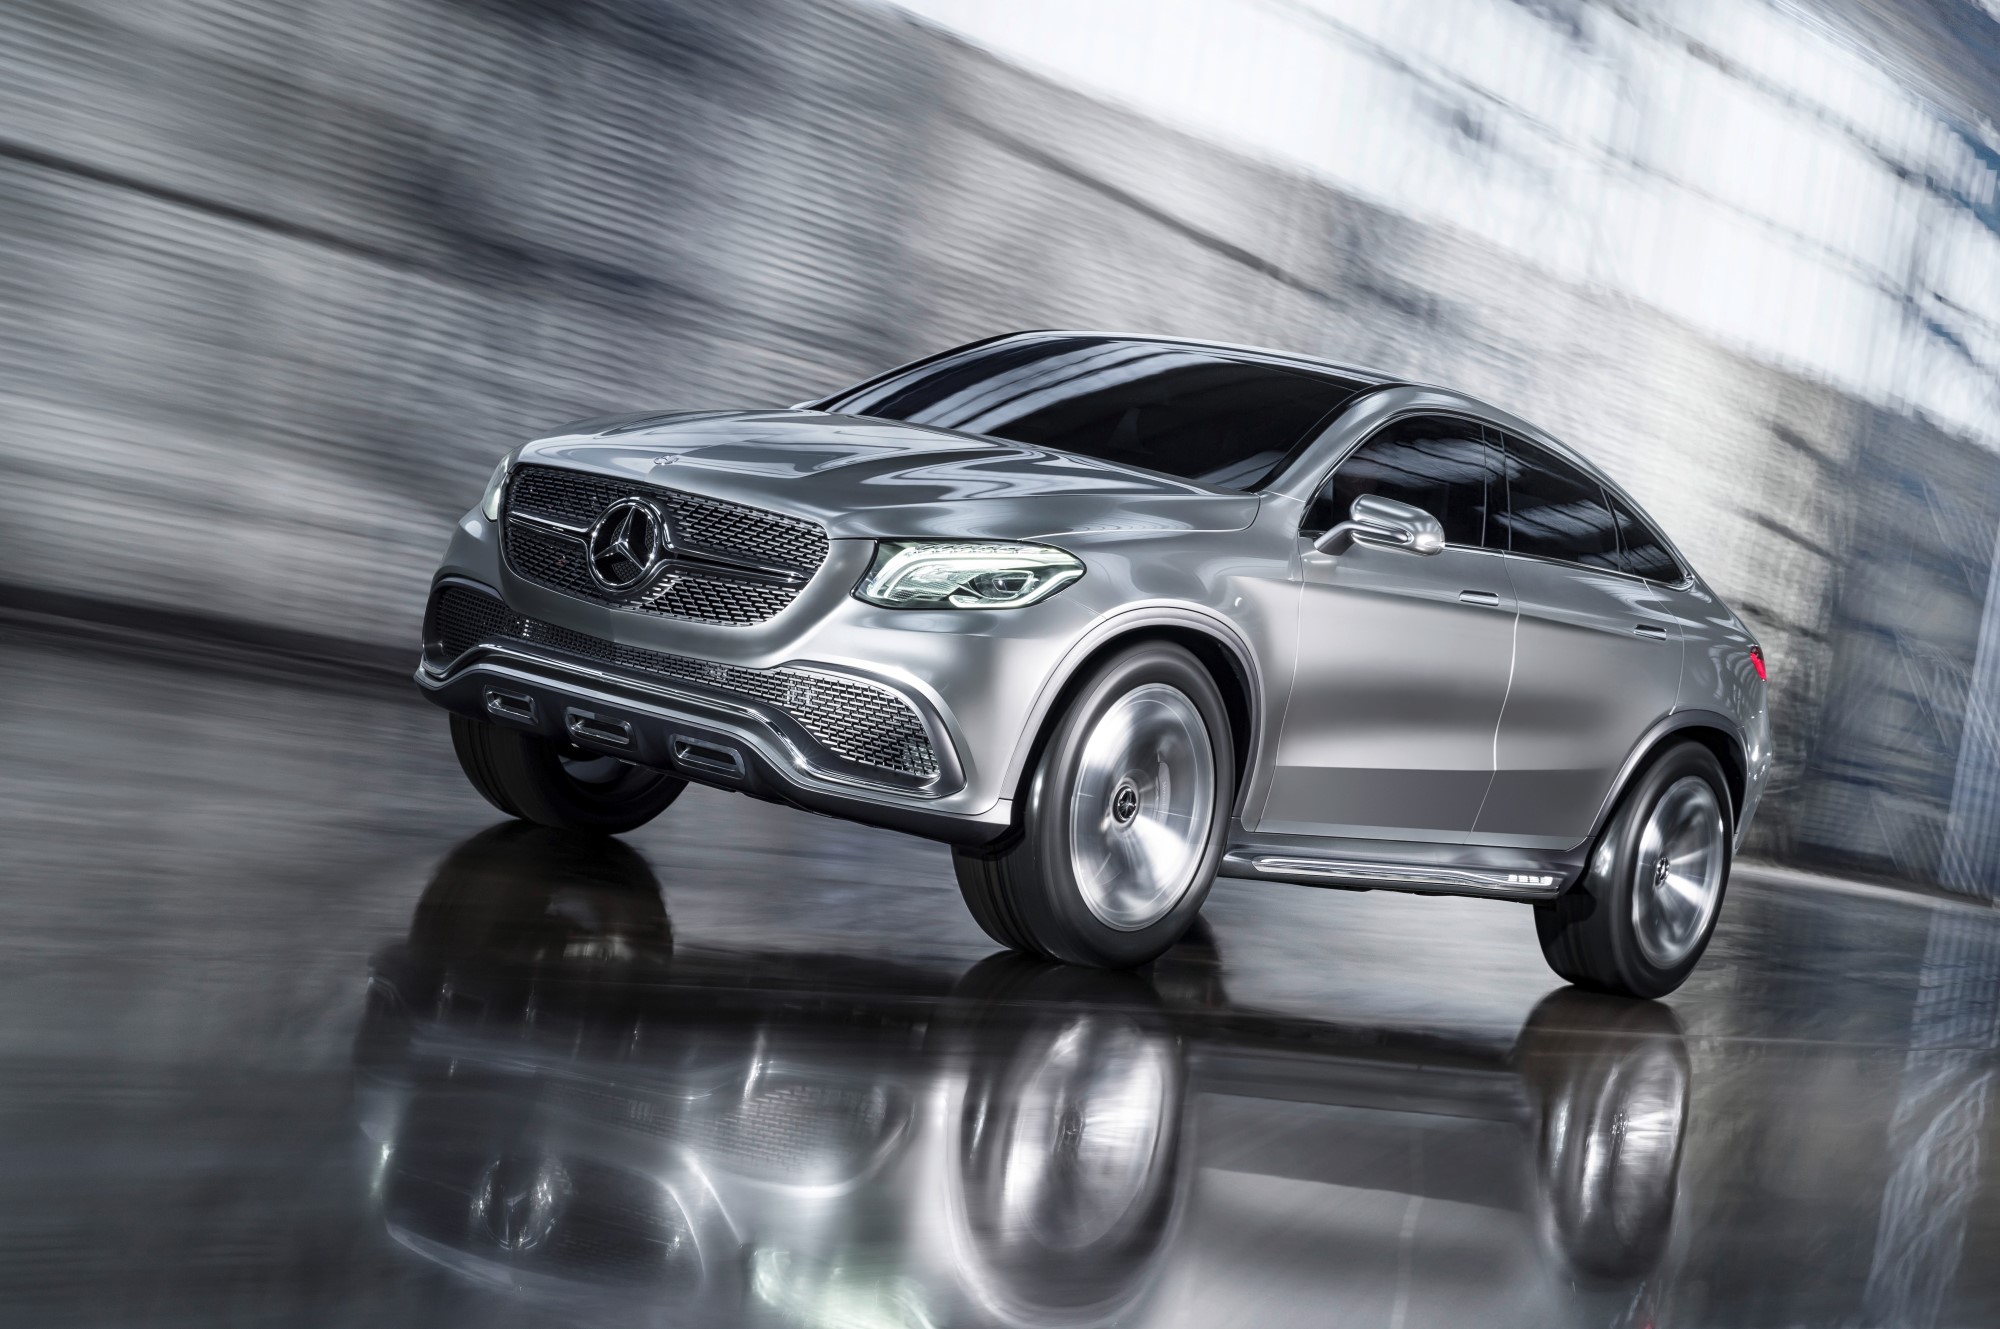 Mercedes Benz Concept Coupe Suv Debuts At The 14 Beijing Auto Show